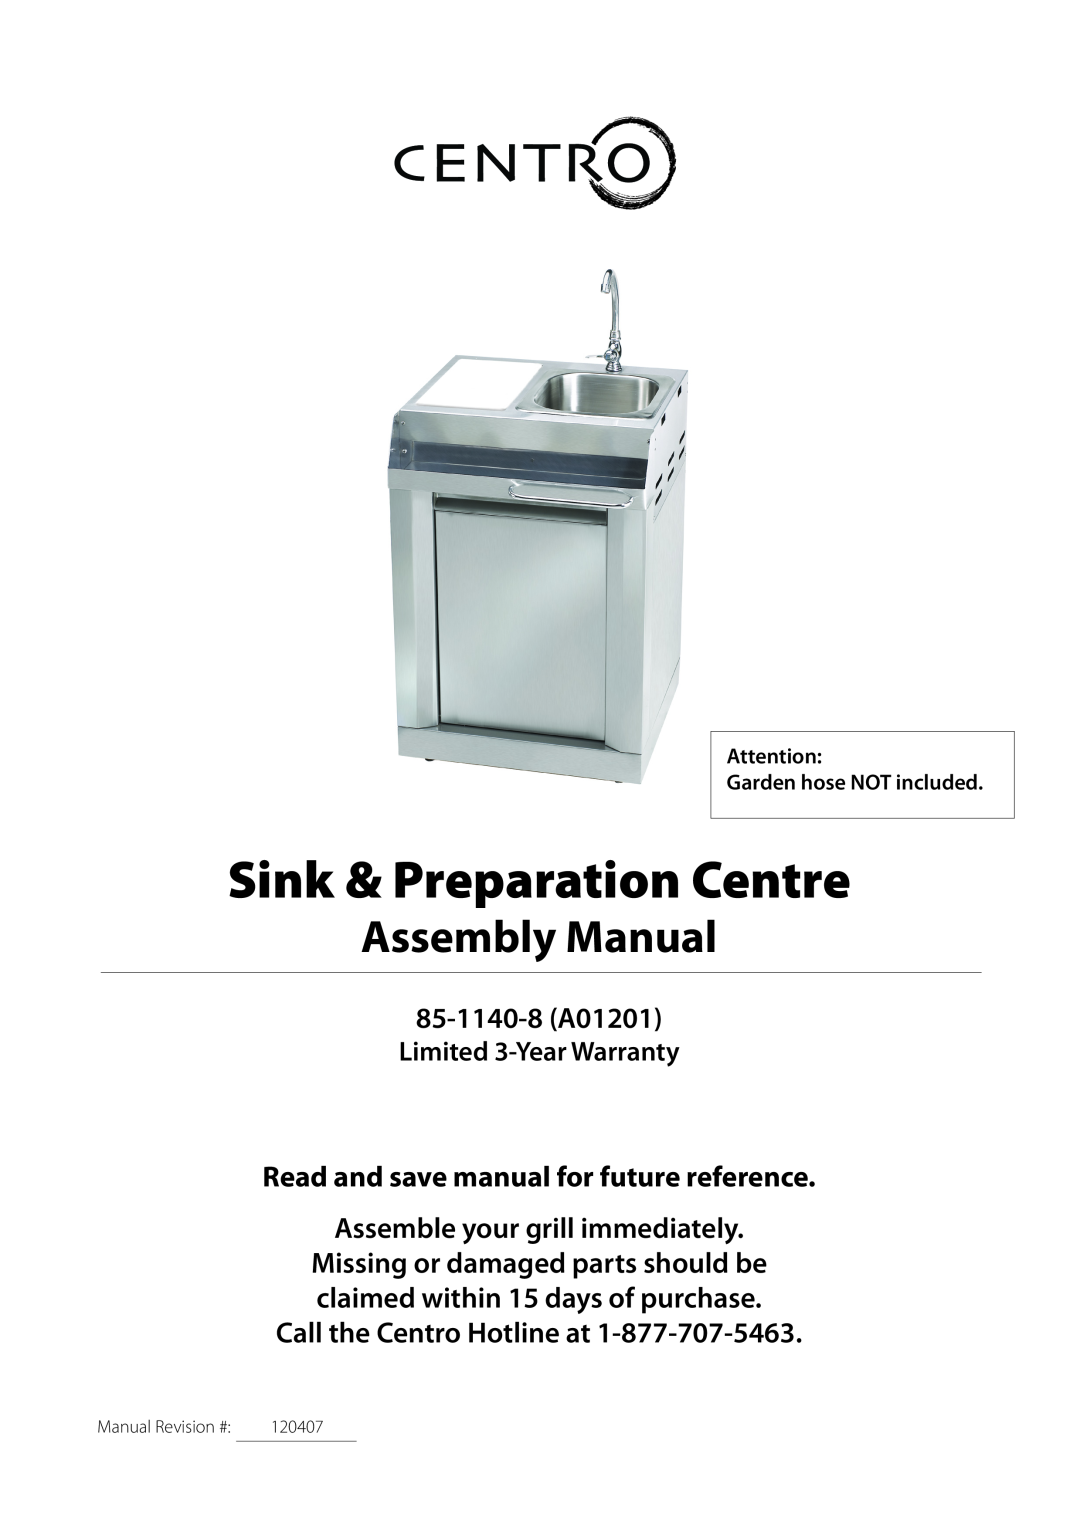 Centro 120407 warranty Missing or damaged parts should be claimed within 15 days of purchase, Sink & Preparation Centre 